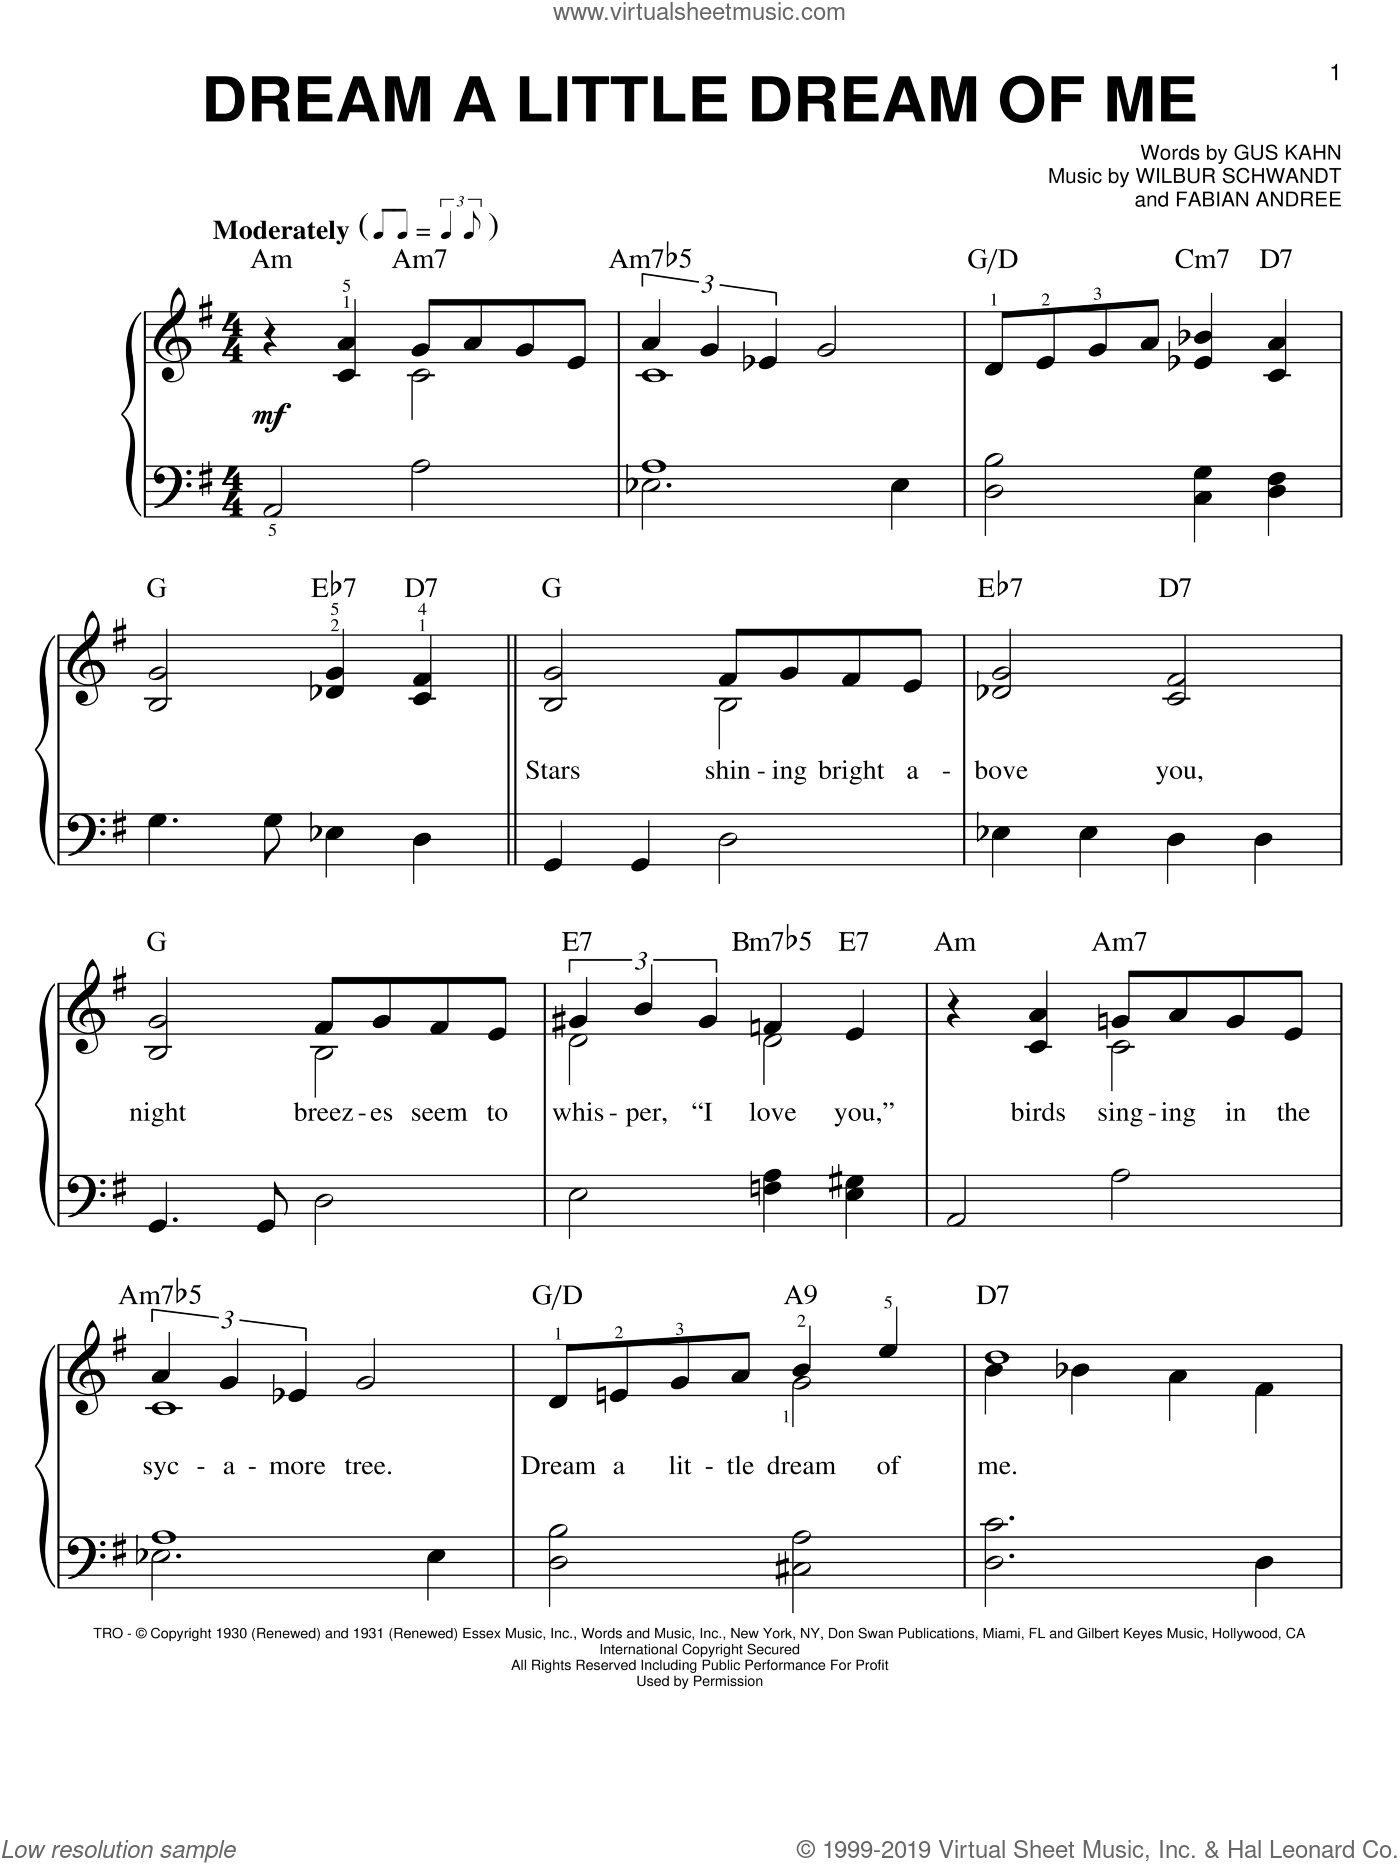 Armstrong - Dream A Little Dream Of Me sheet music for piano solo.